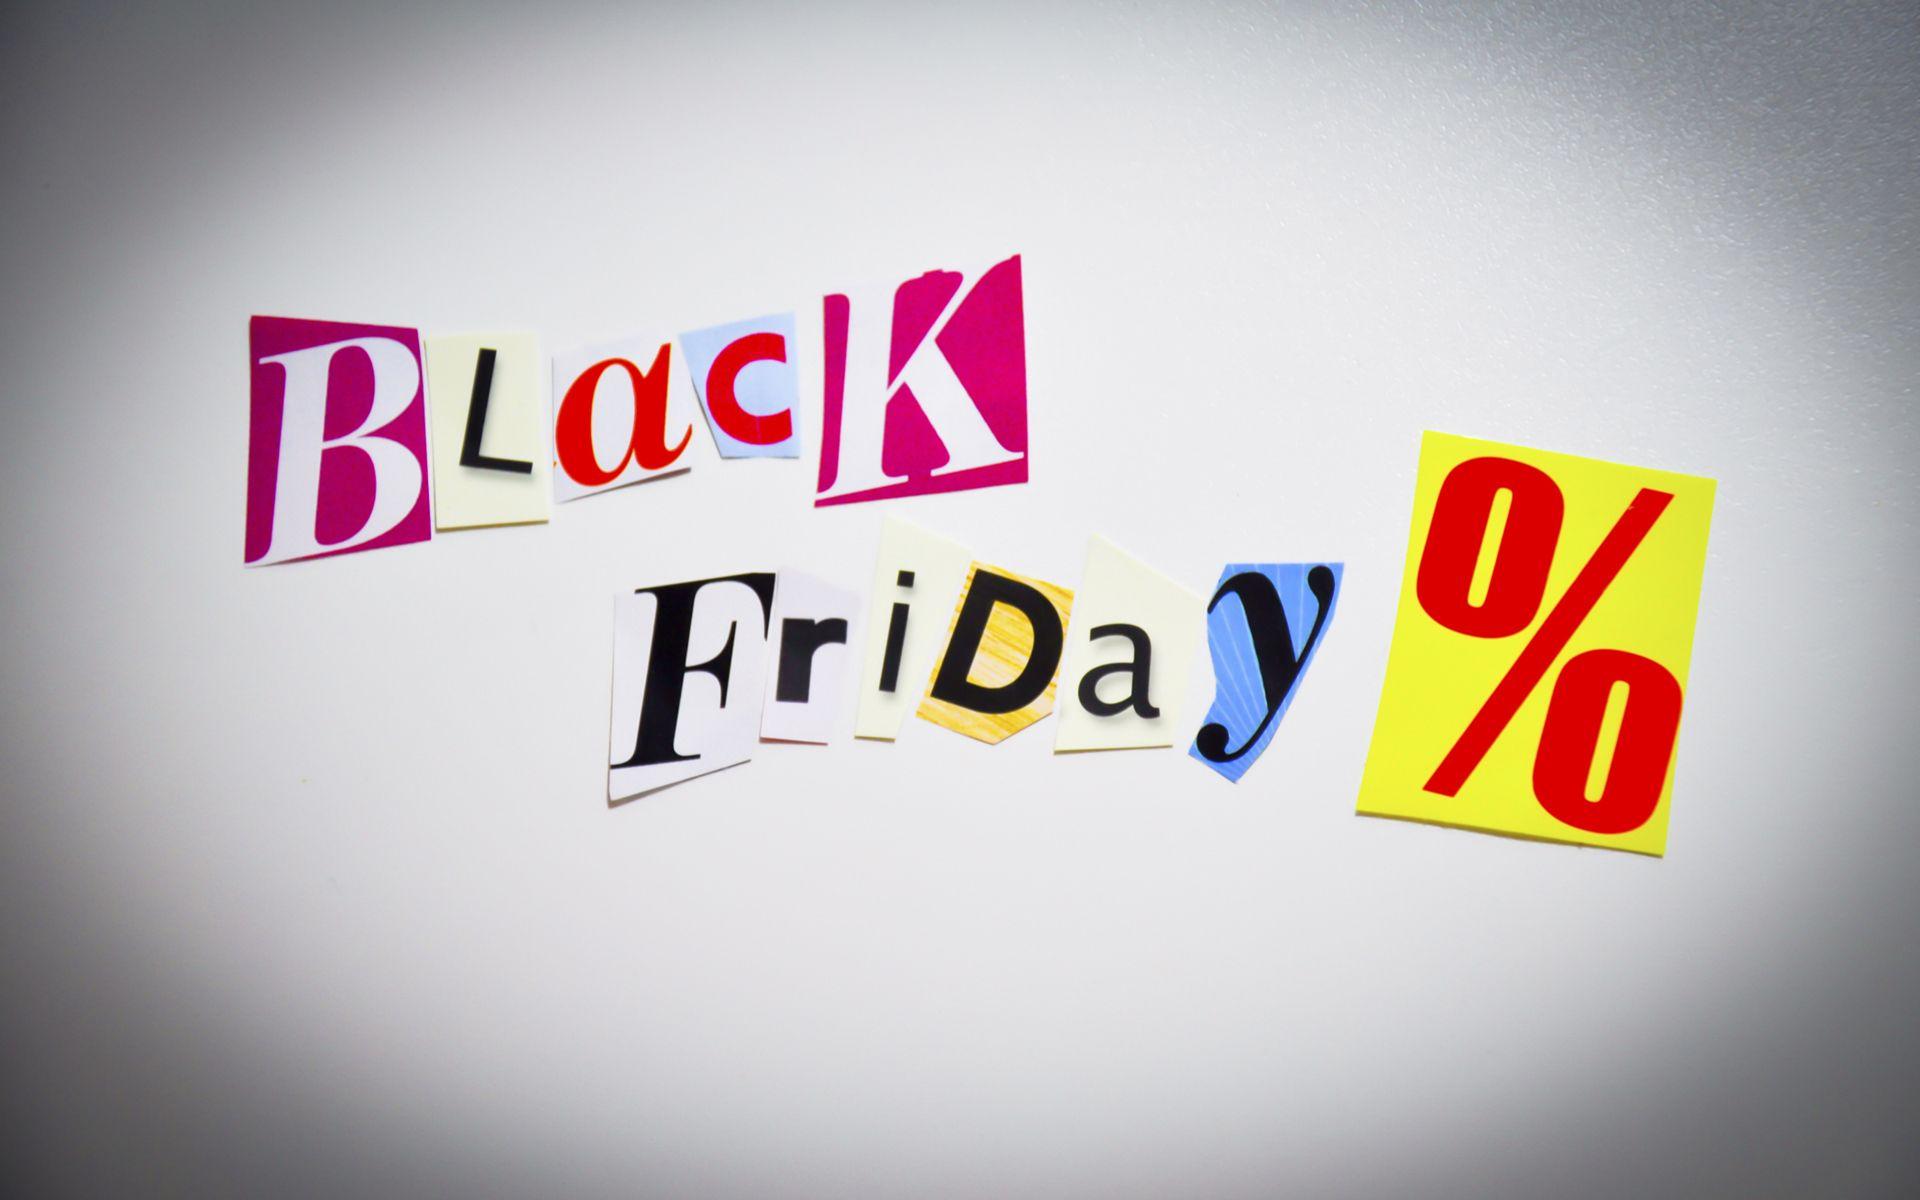 Black friday 2016 HD wallpaper image picture free download